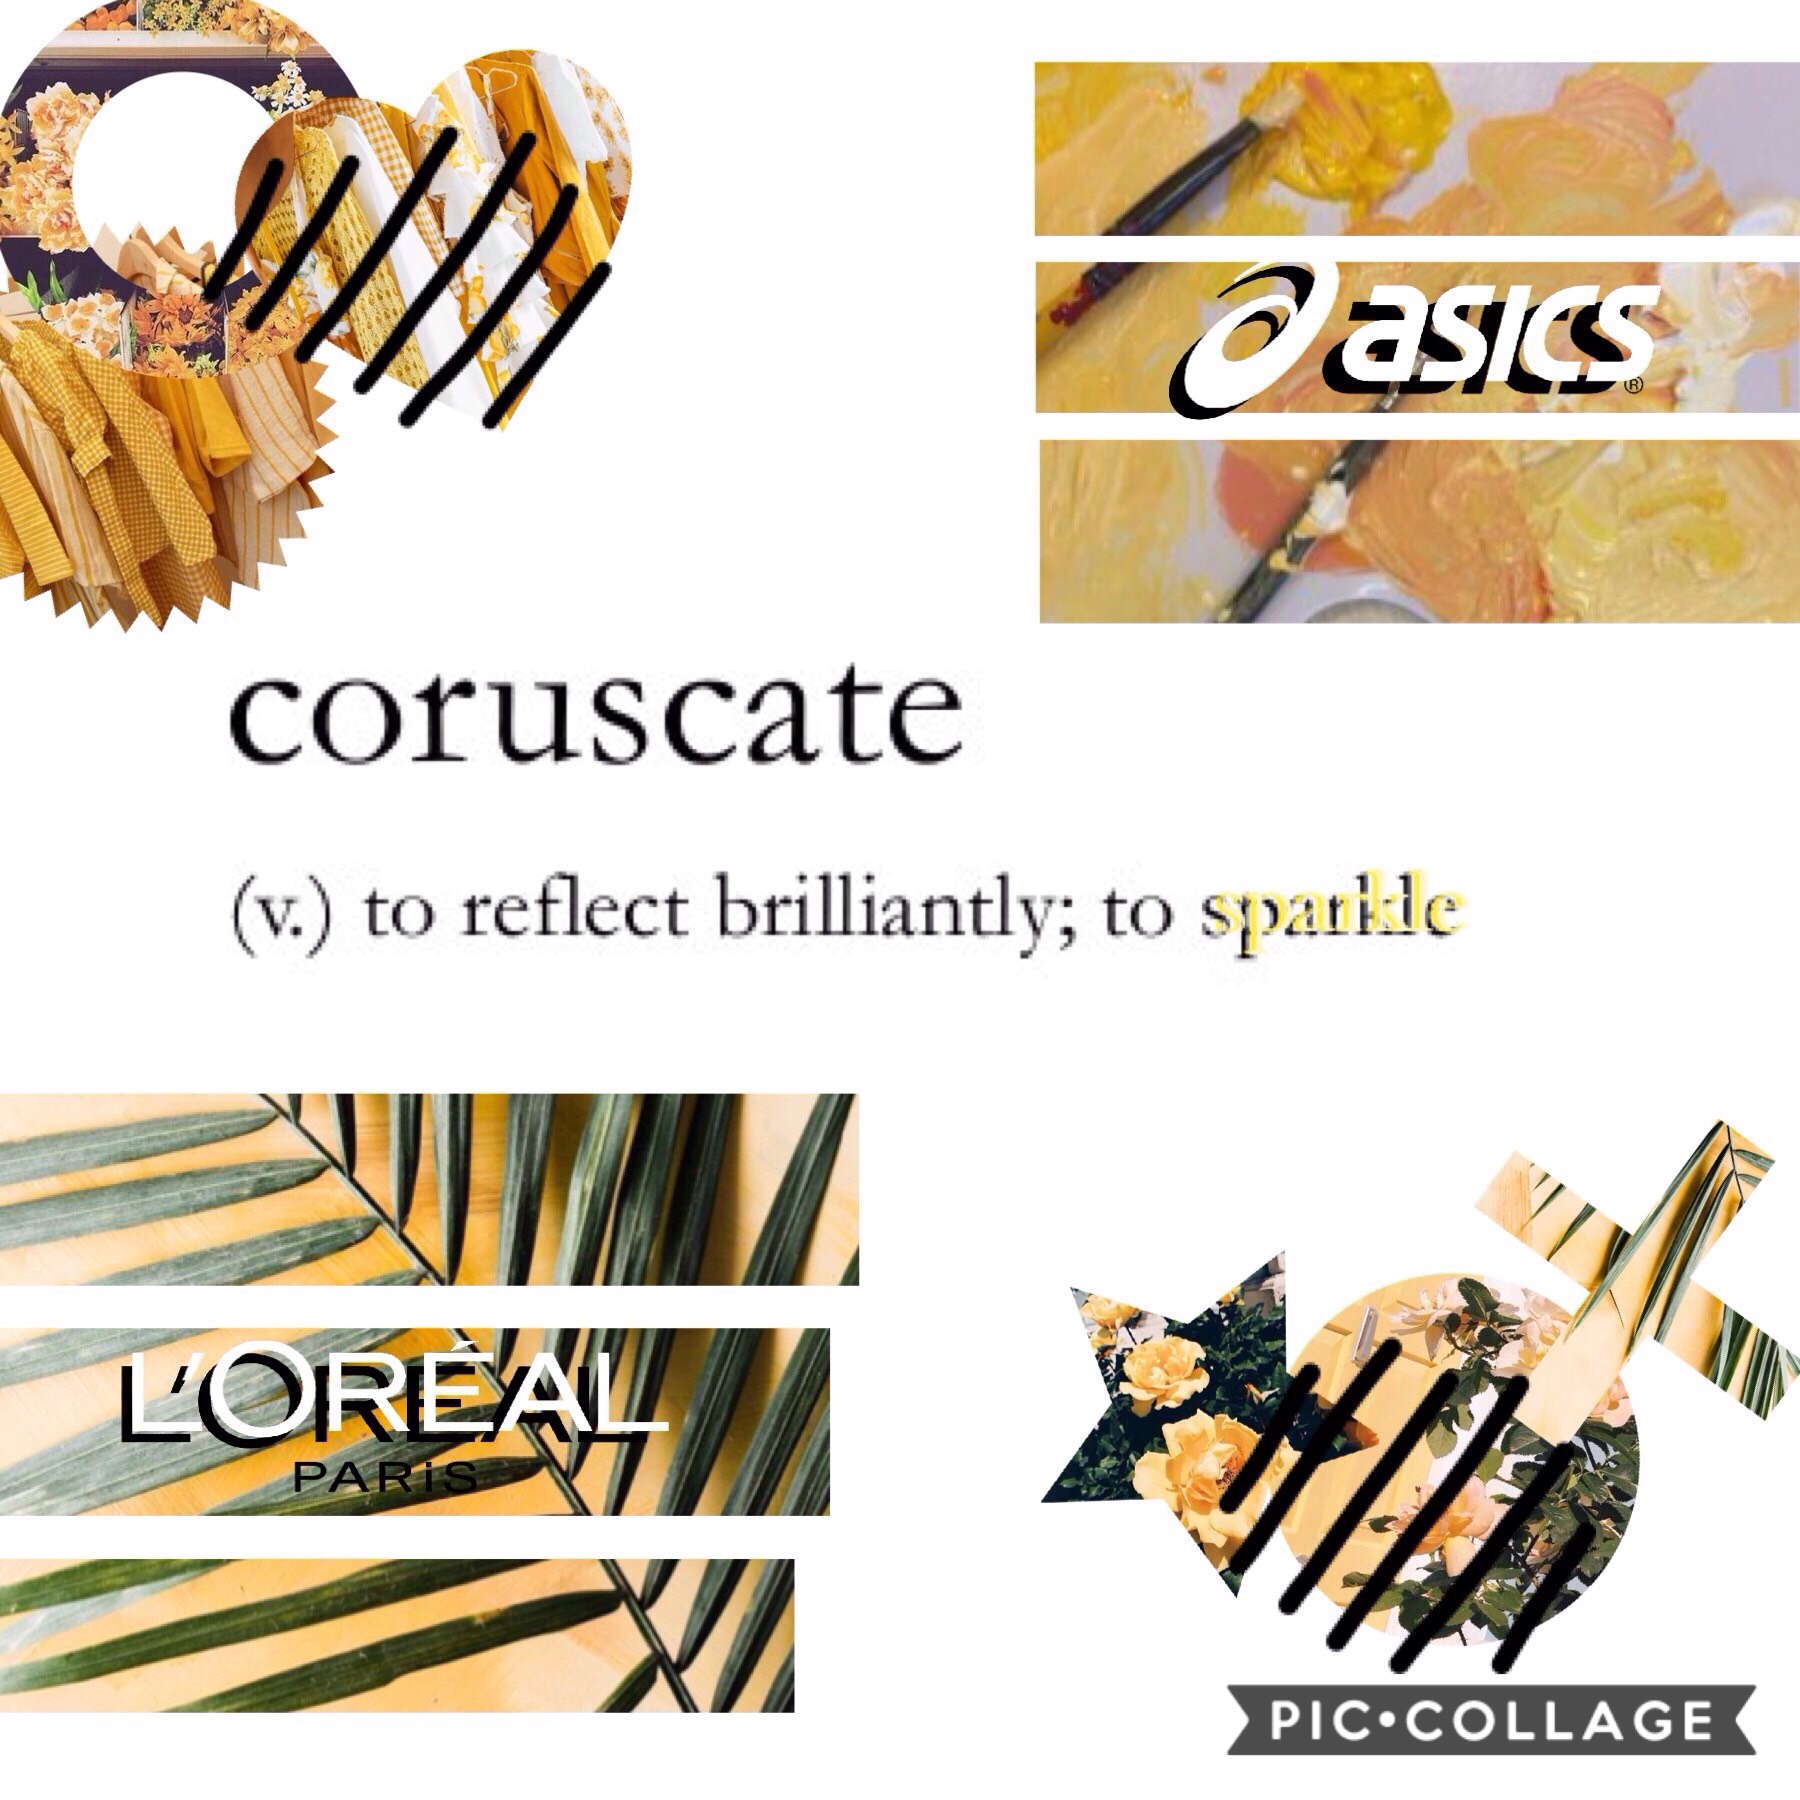 | coruscate | "to reflect brilliantly; to sparkle ✨|
hey guys!! super sorry I haven't been that active in the last few weeks! exams are coming up for me and I need to study so I might post a little less than usual.
keep commenting because I will be more a